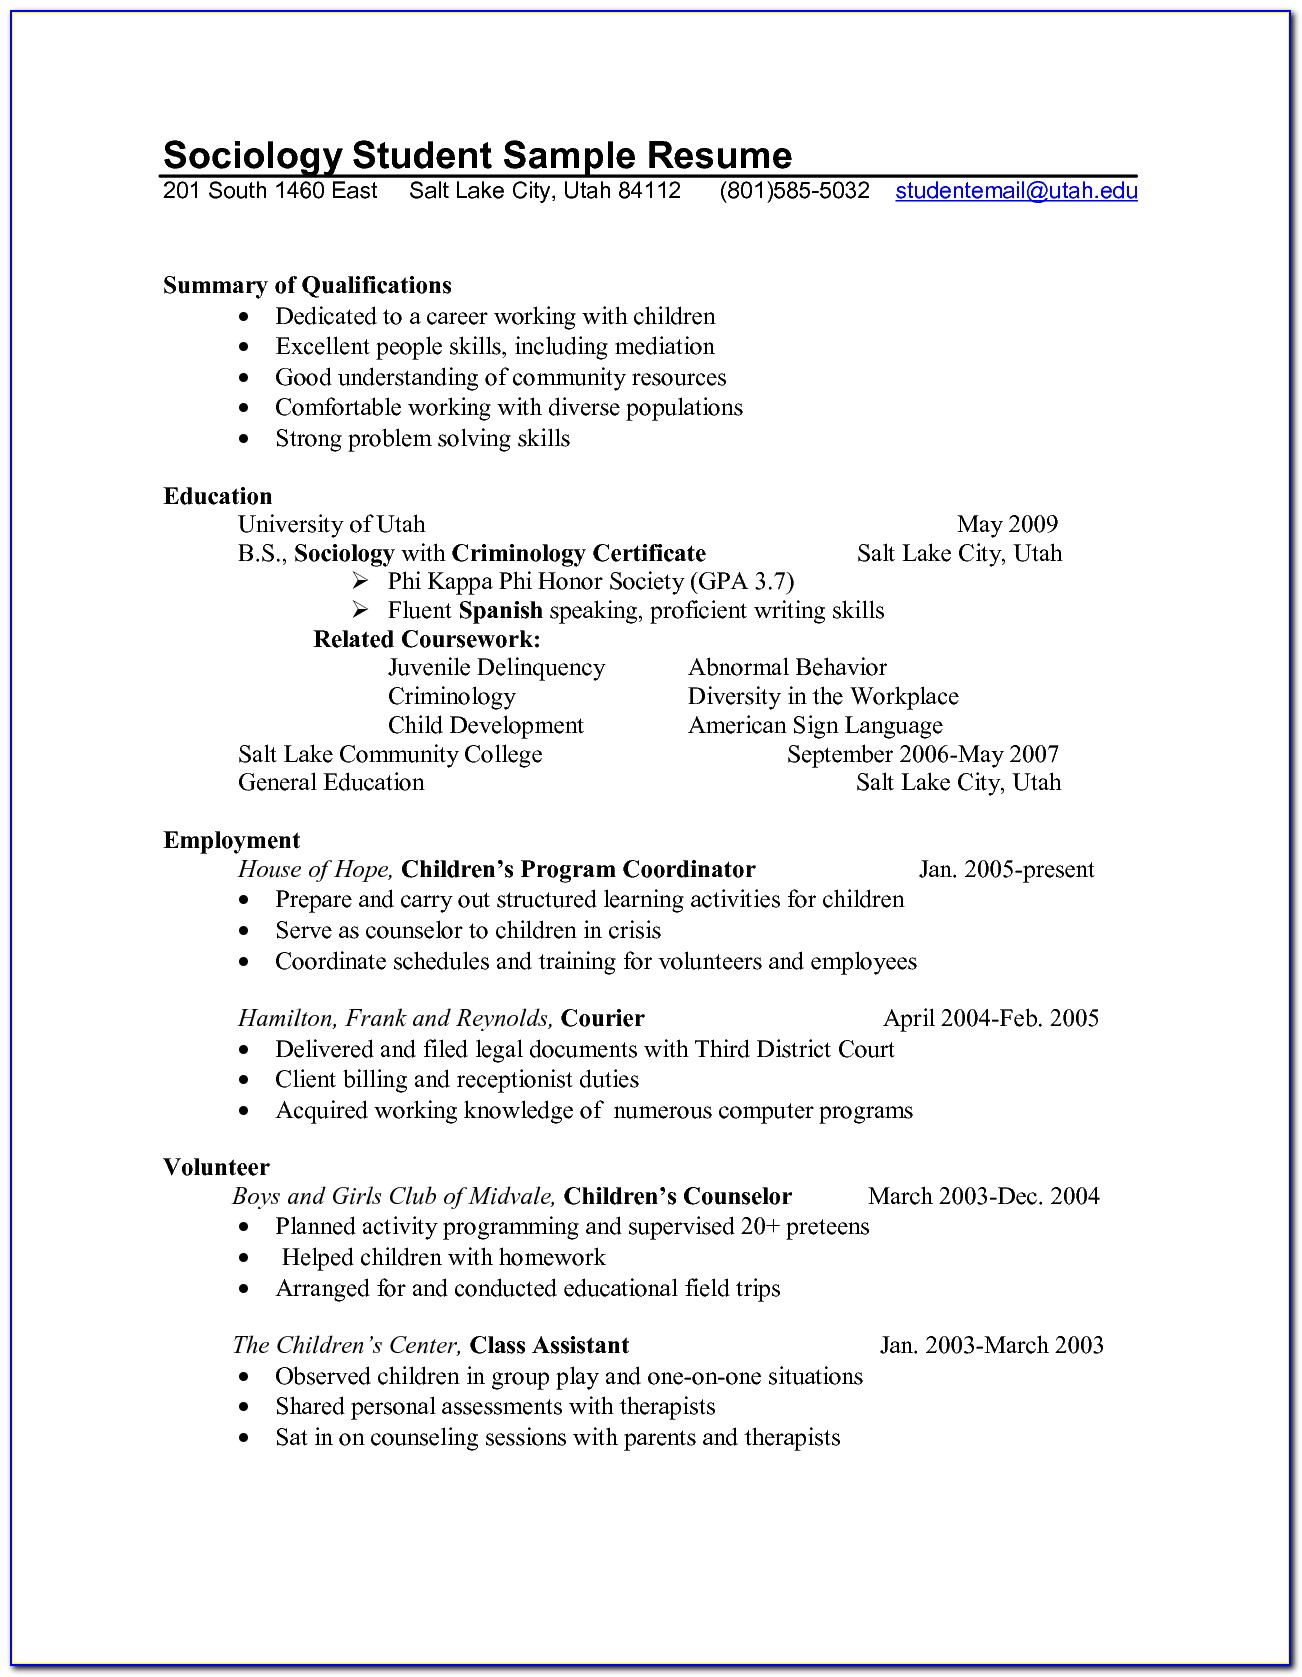 Resume Templates For Sociology Majors